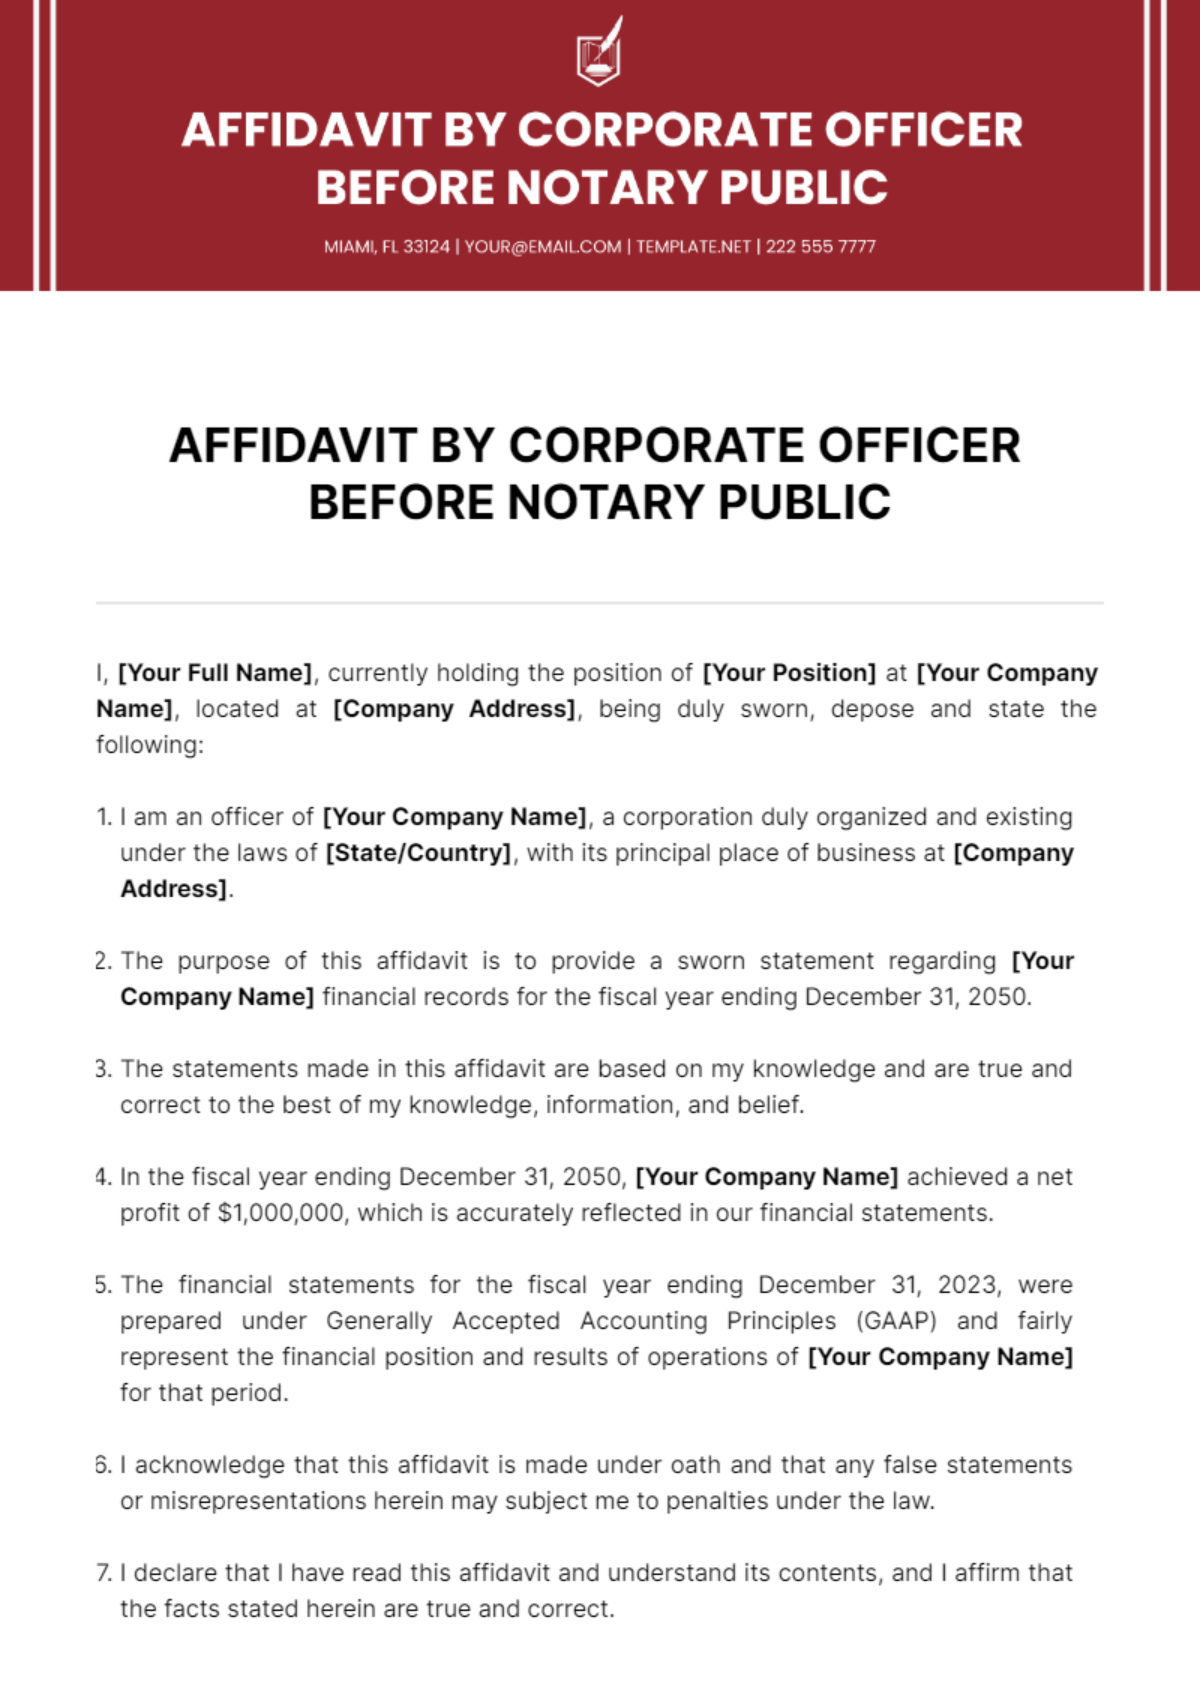 Free Affidavit By Corporate Officer Before Notary Public Template